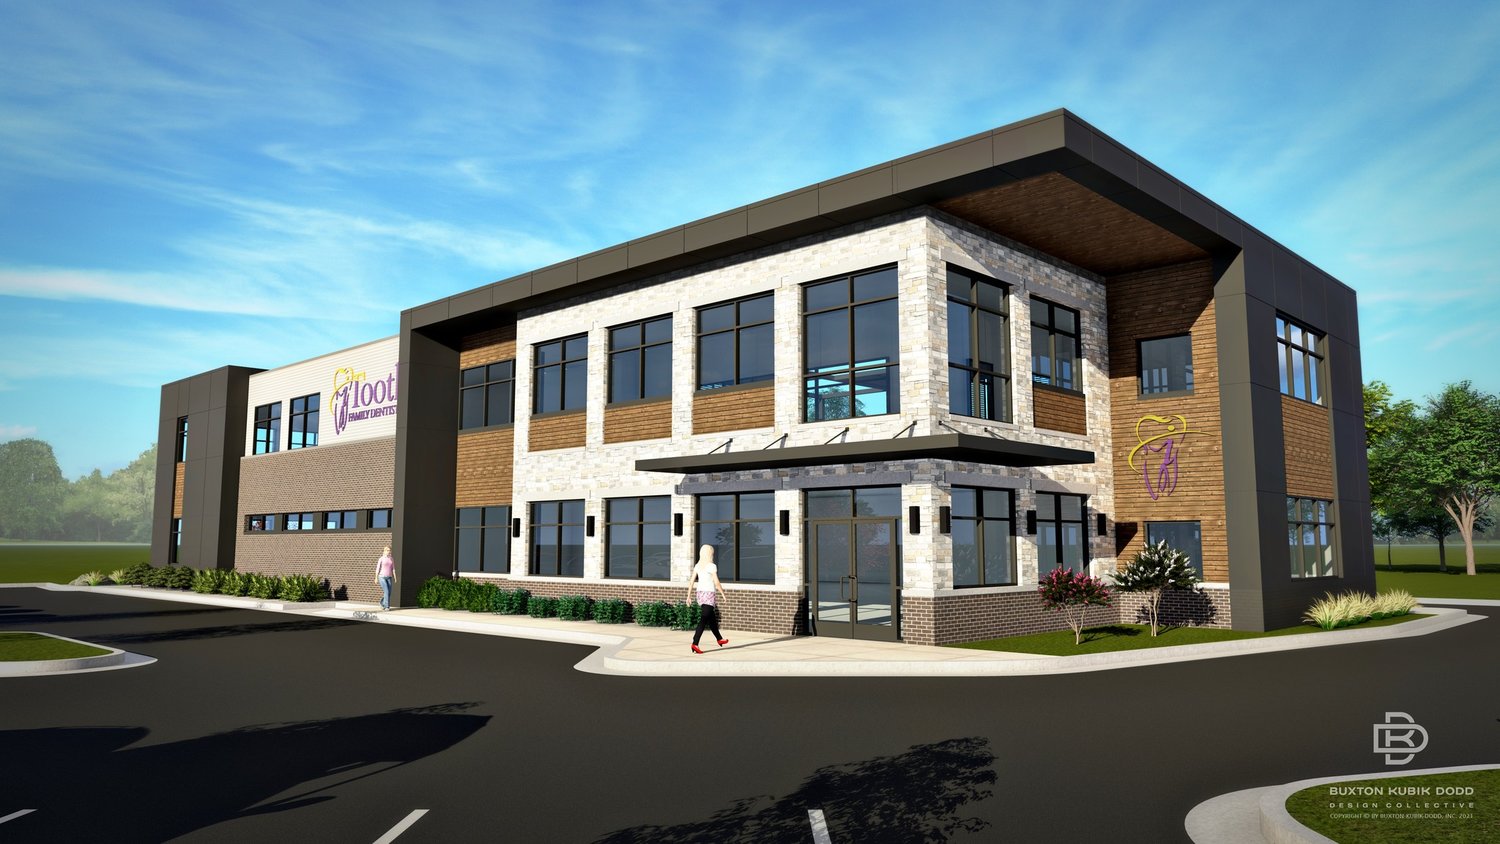 An office for iTooth Family Dentistry is scheduled to open next year.